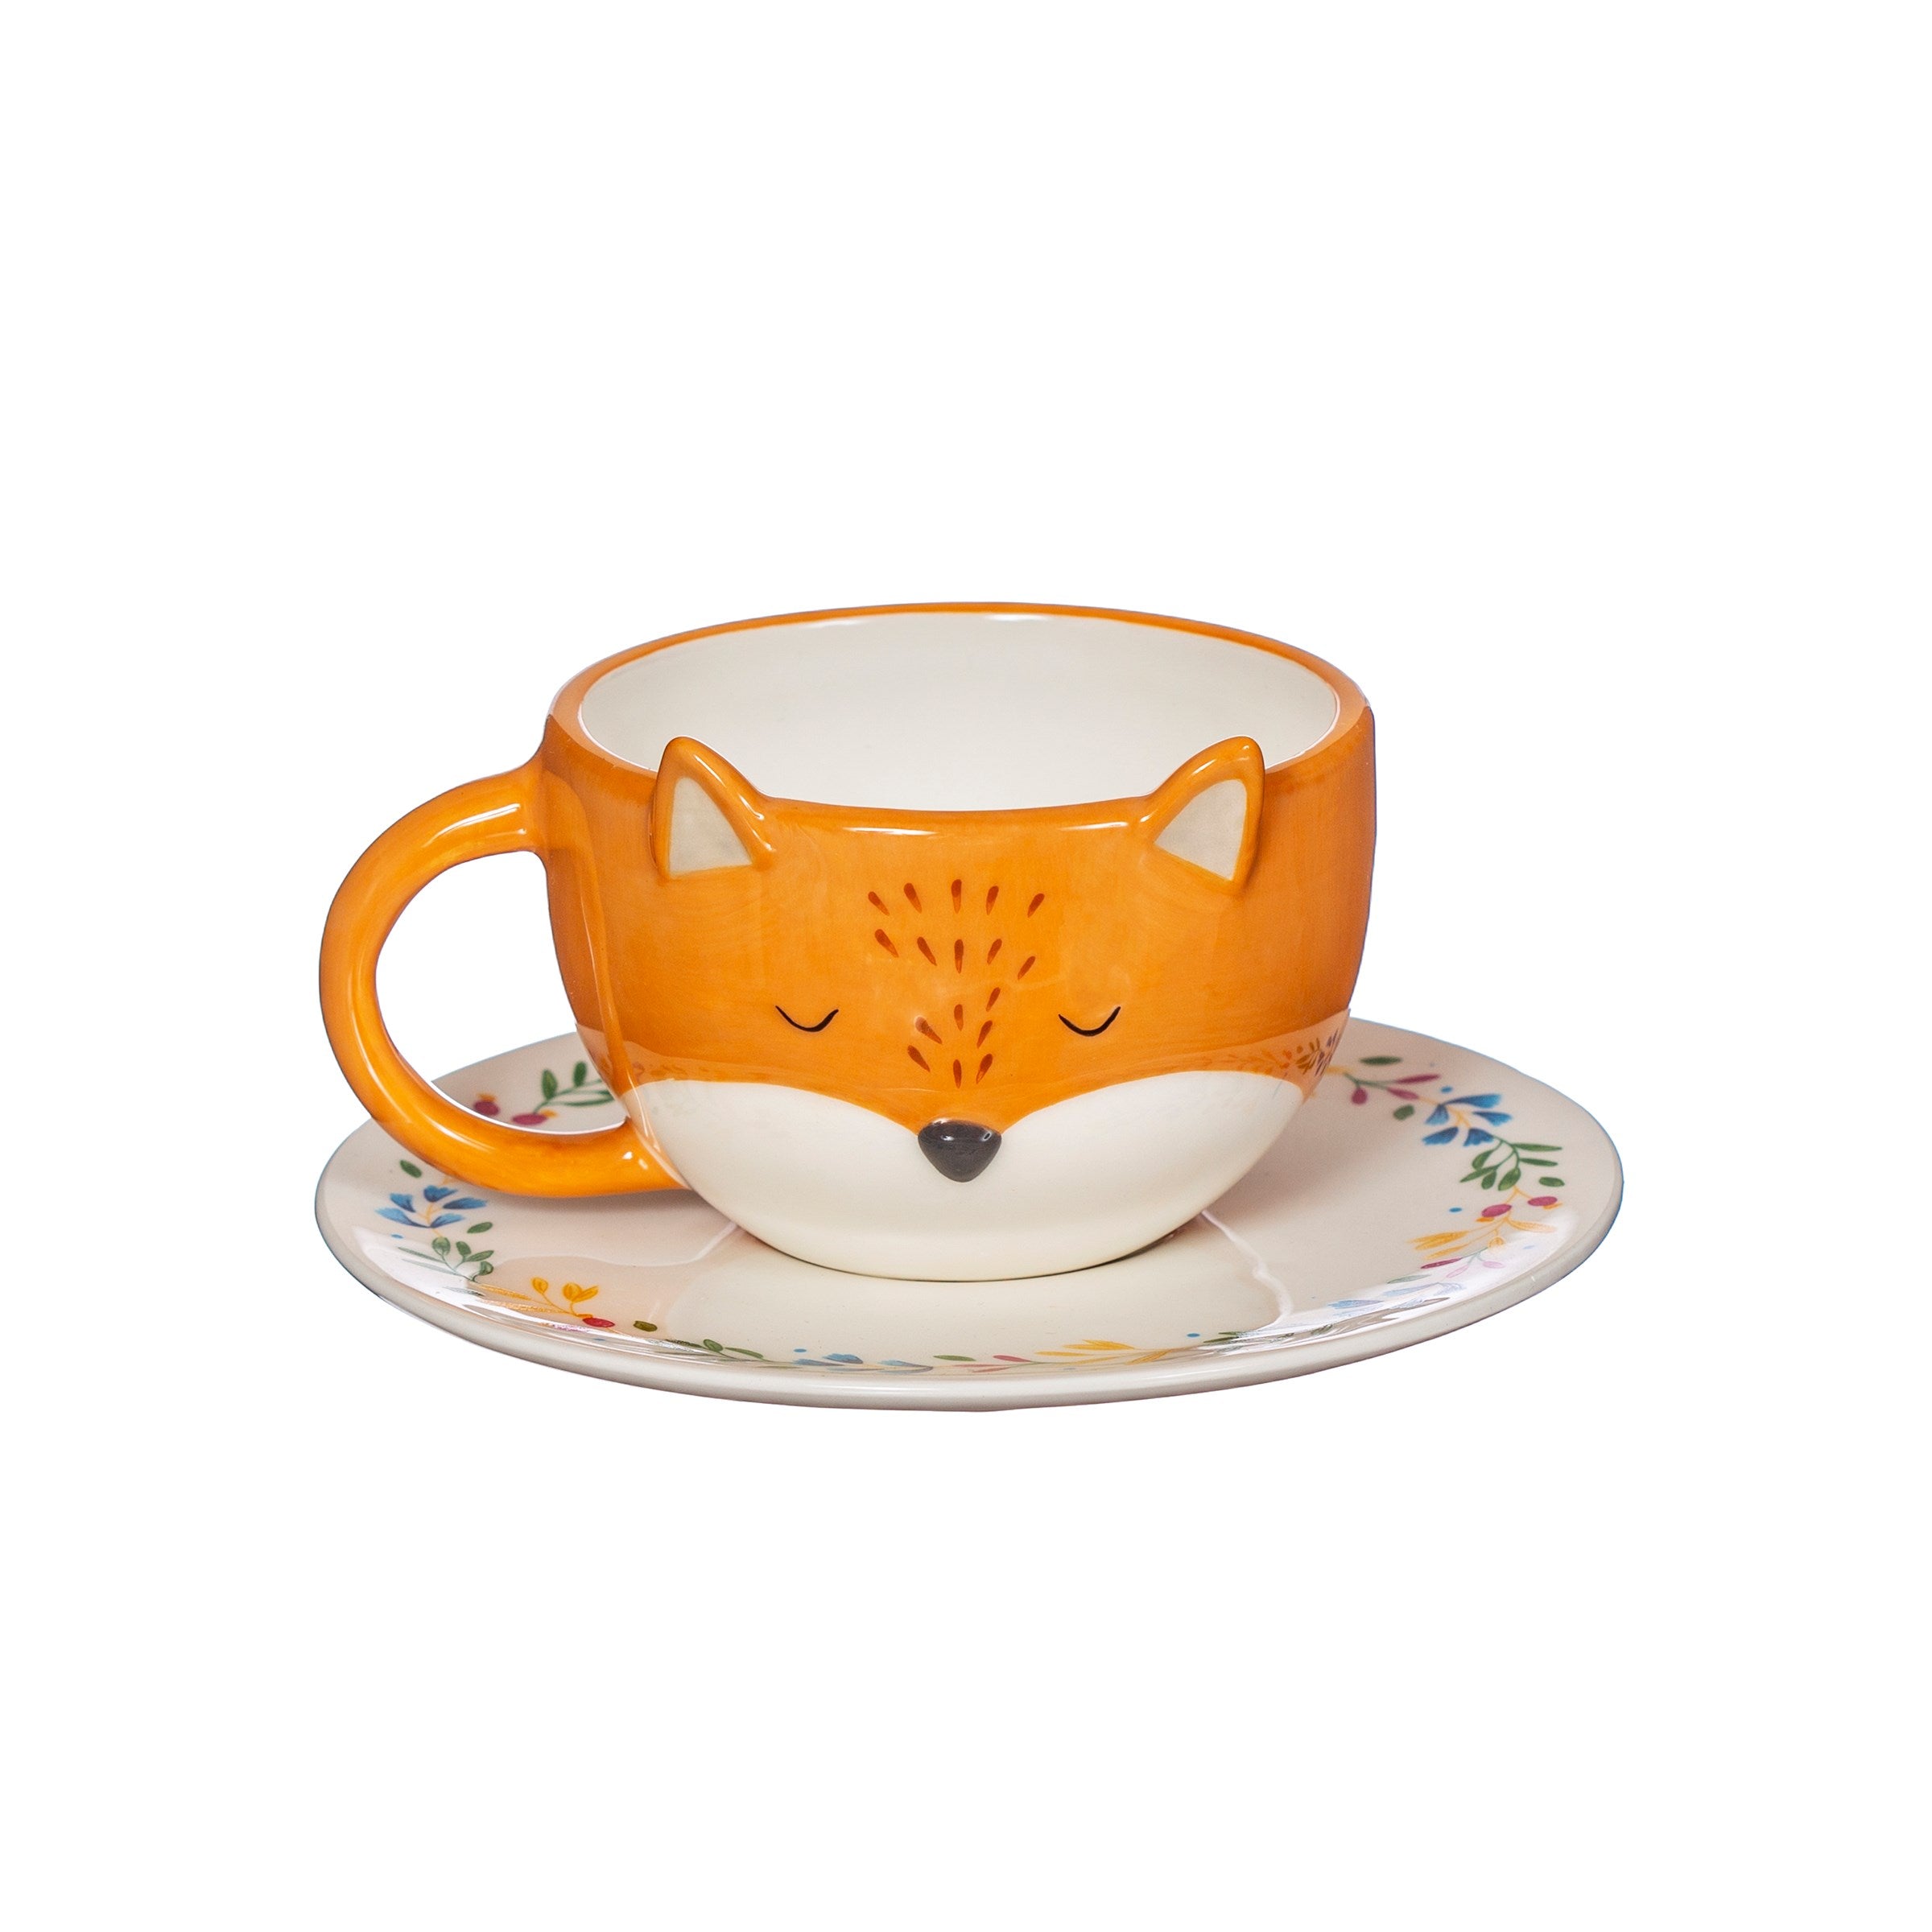 Finlay Fox Tea Cup and Saucer in Gift Box - The Cooks Cupboard Ltd